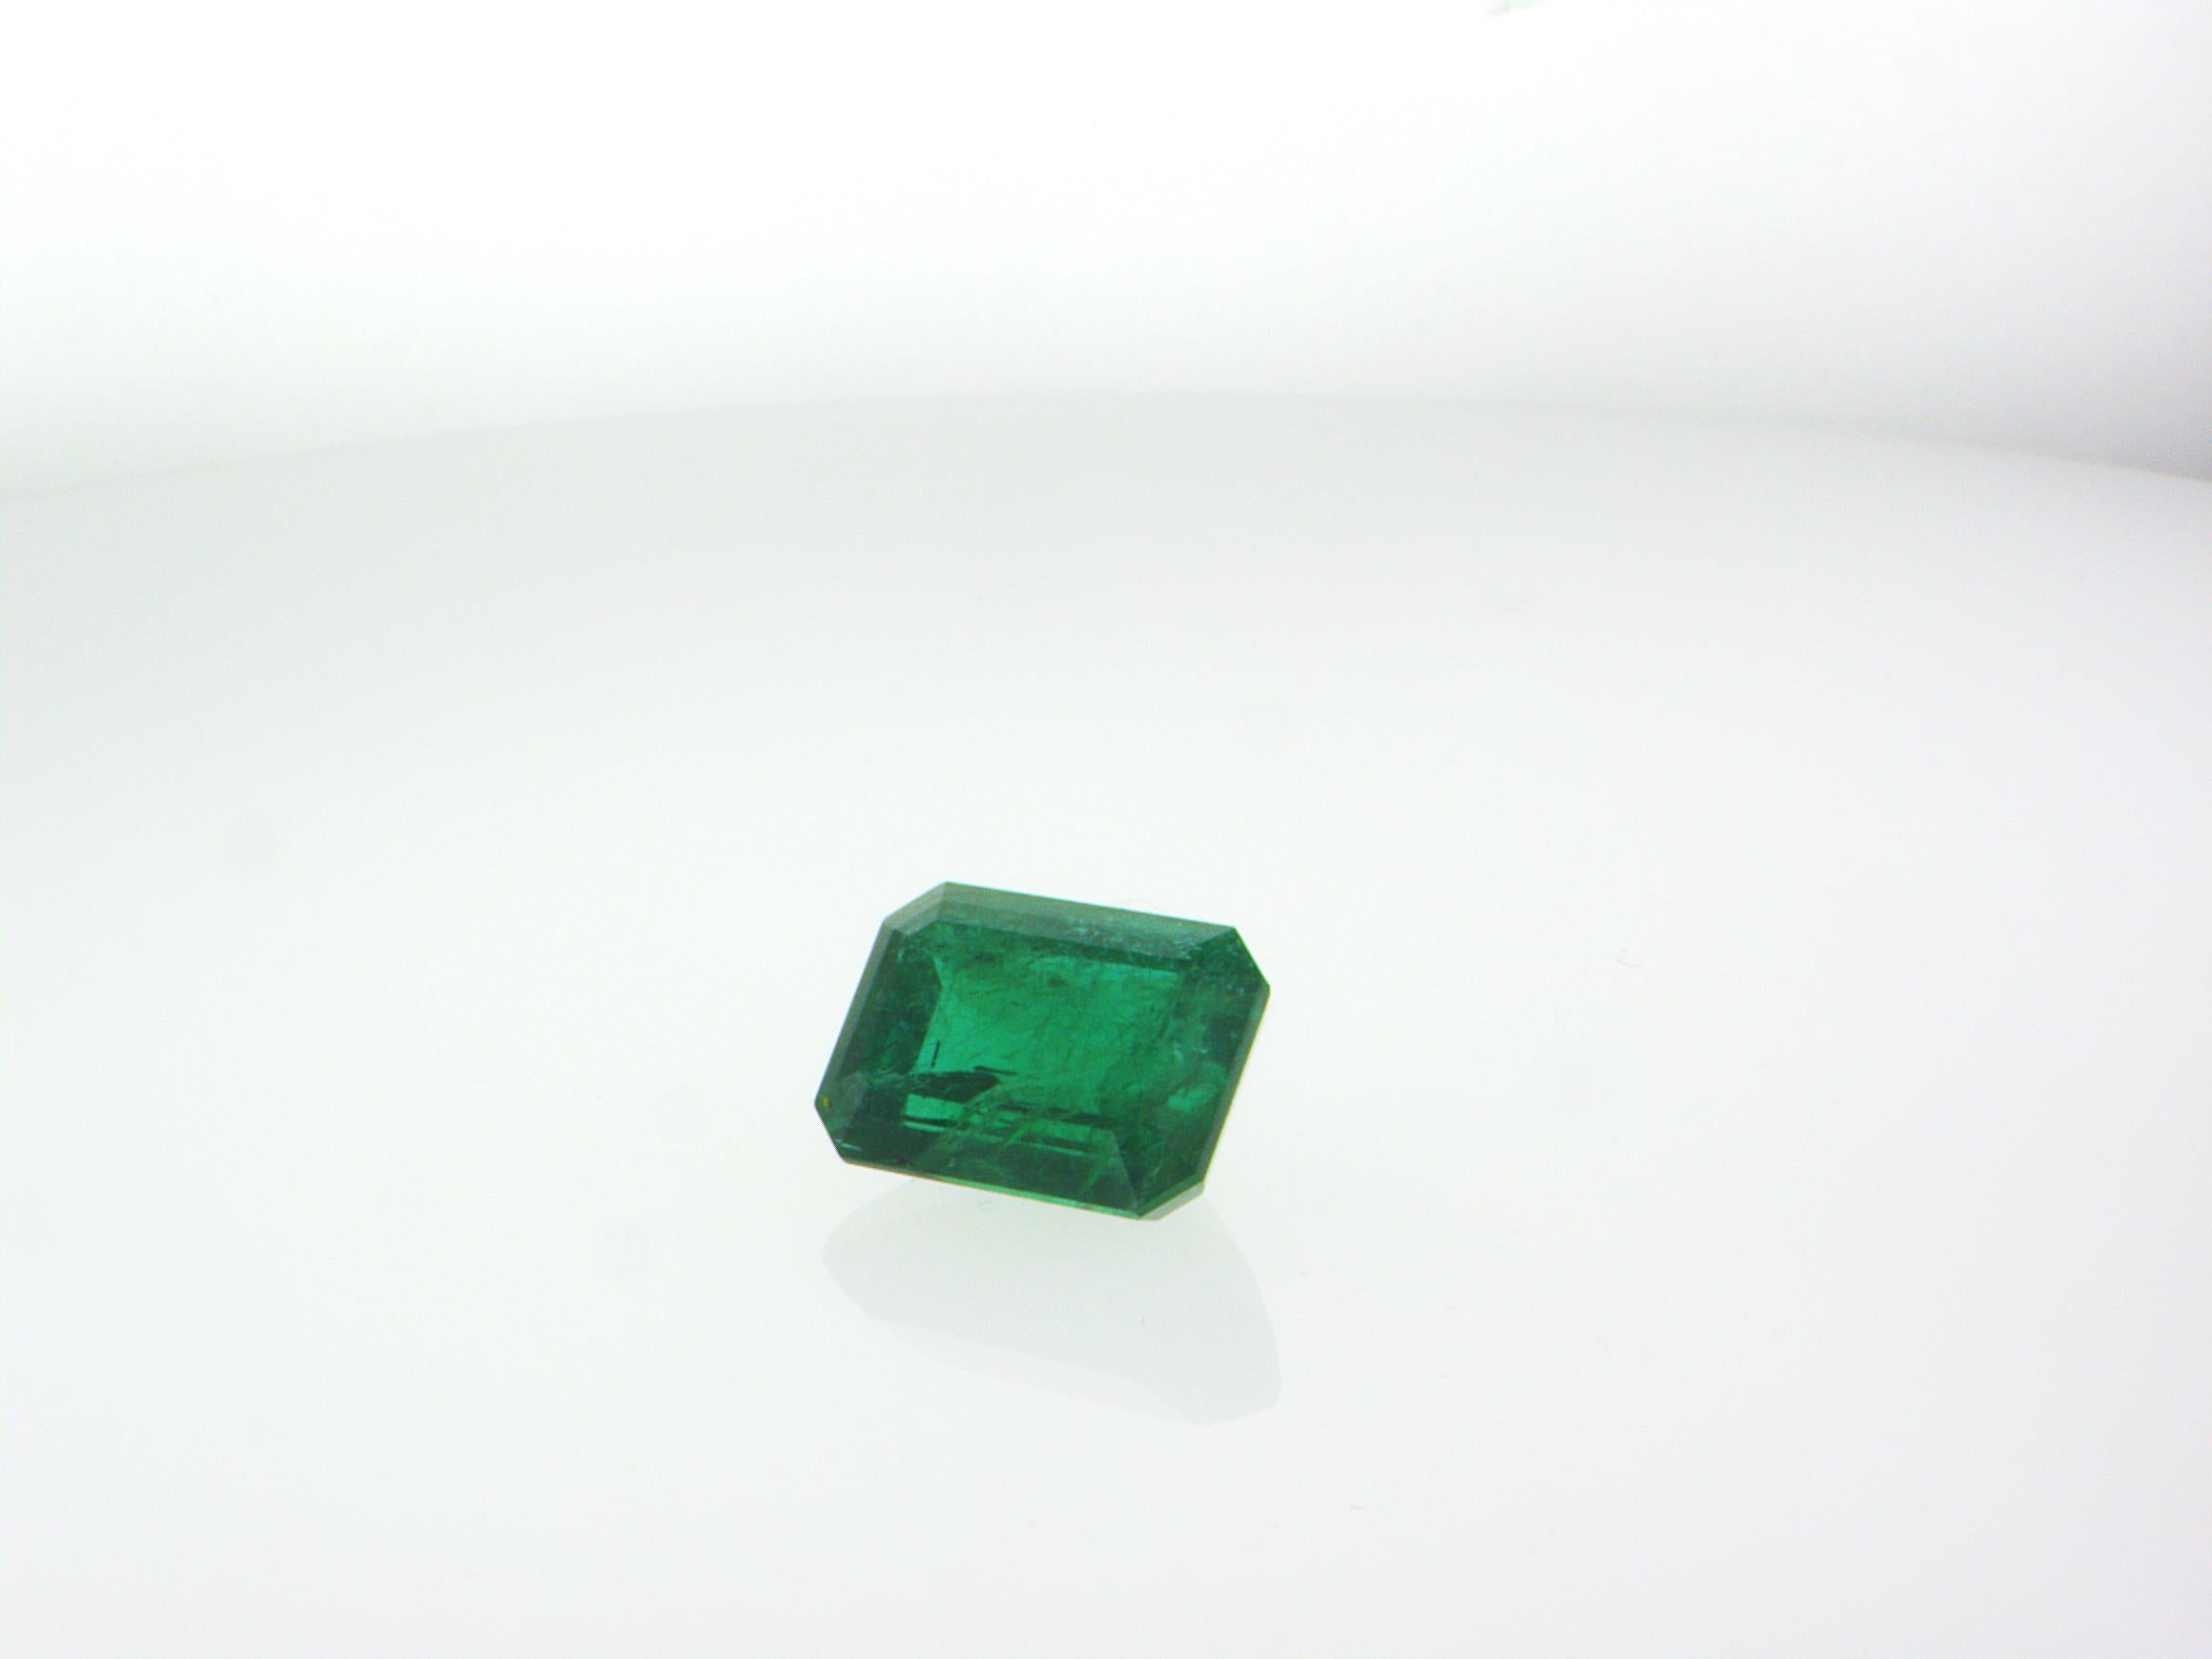 Gorgeus Brazil Emerald with unbelievable inner world. Brazilian Emerald is a vibrant rich green variant of Emerald.
Weight - 10.68 carat
Measurements: 14.91 x 10.86 x 8.12 mm
Shape/cut: Emerald step cut
Colour: Green
Transparency: